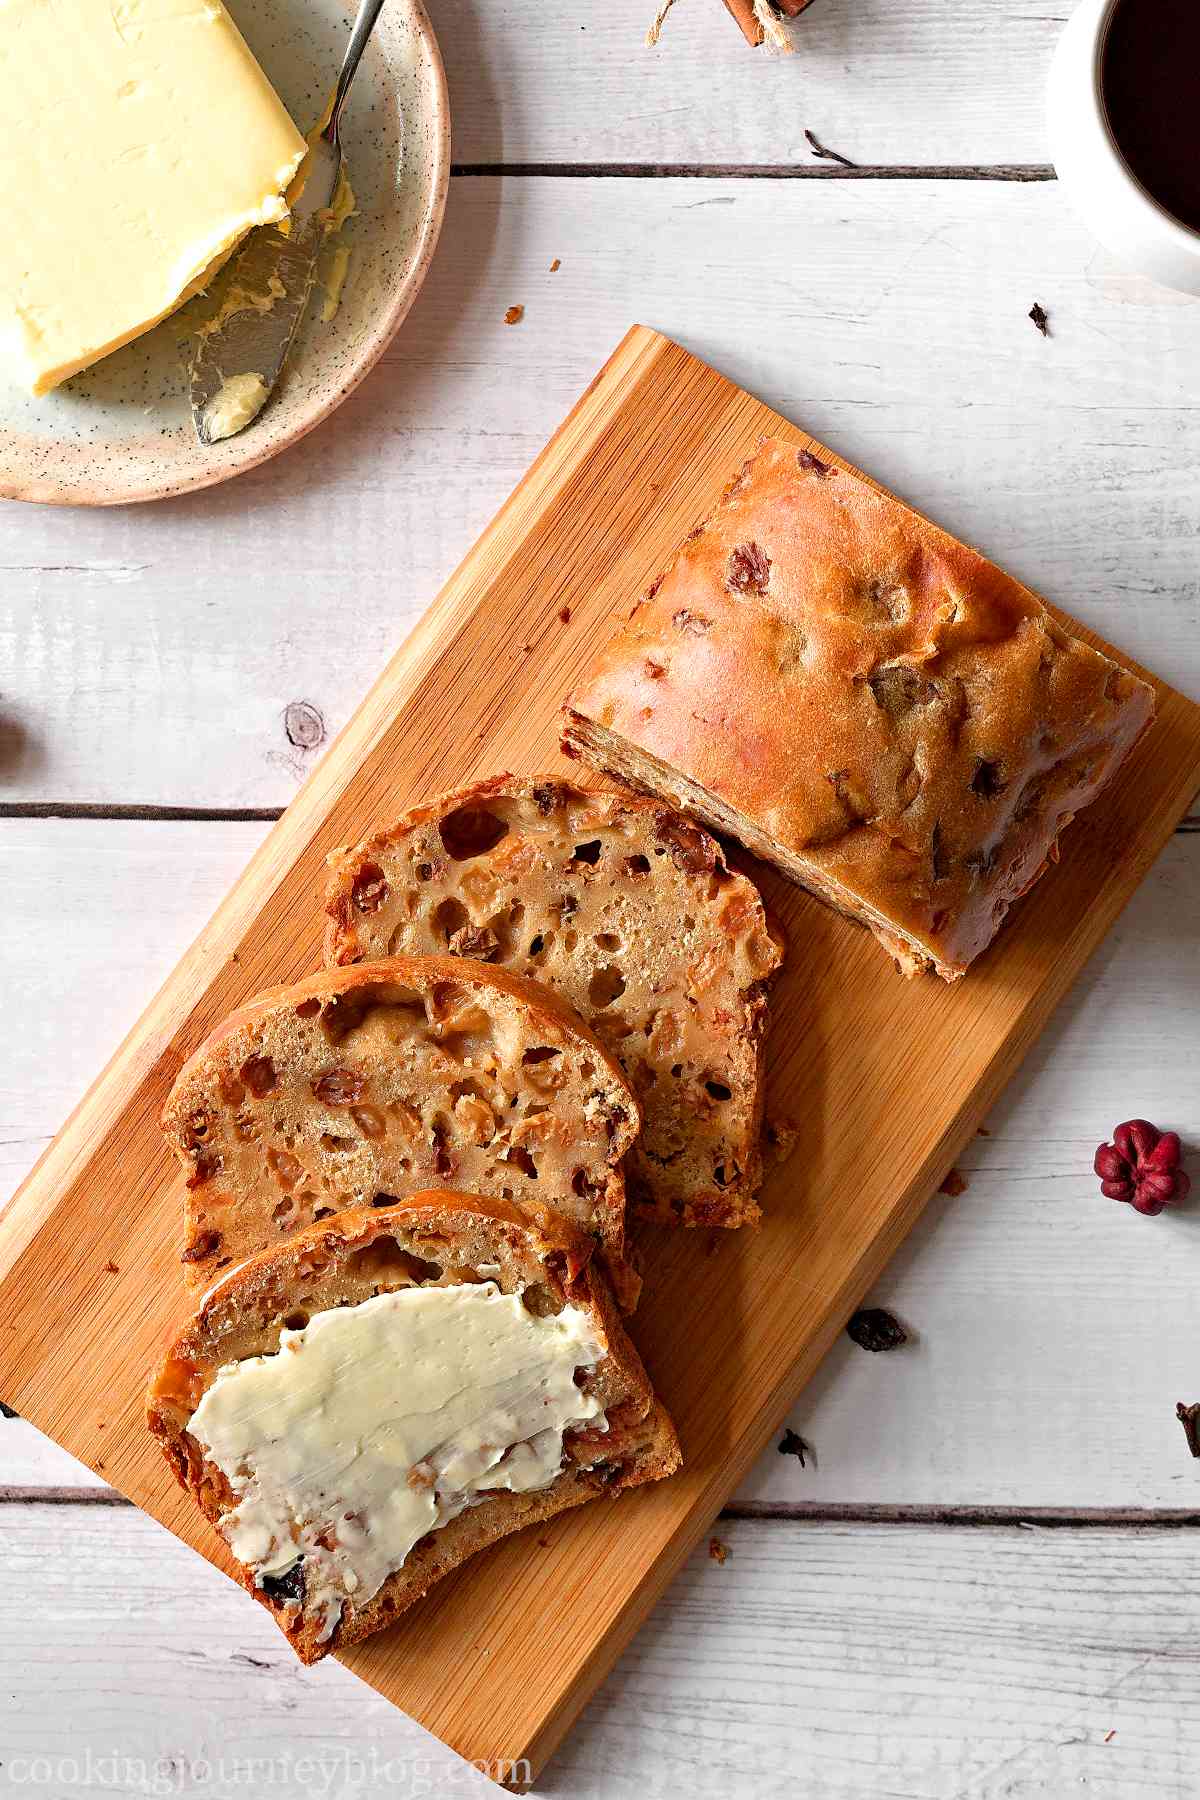 Sliced Irish Barmbrack, served with butter